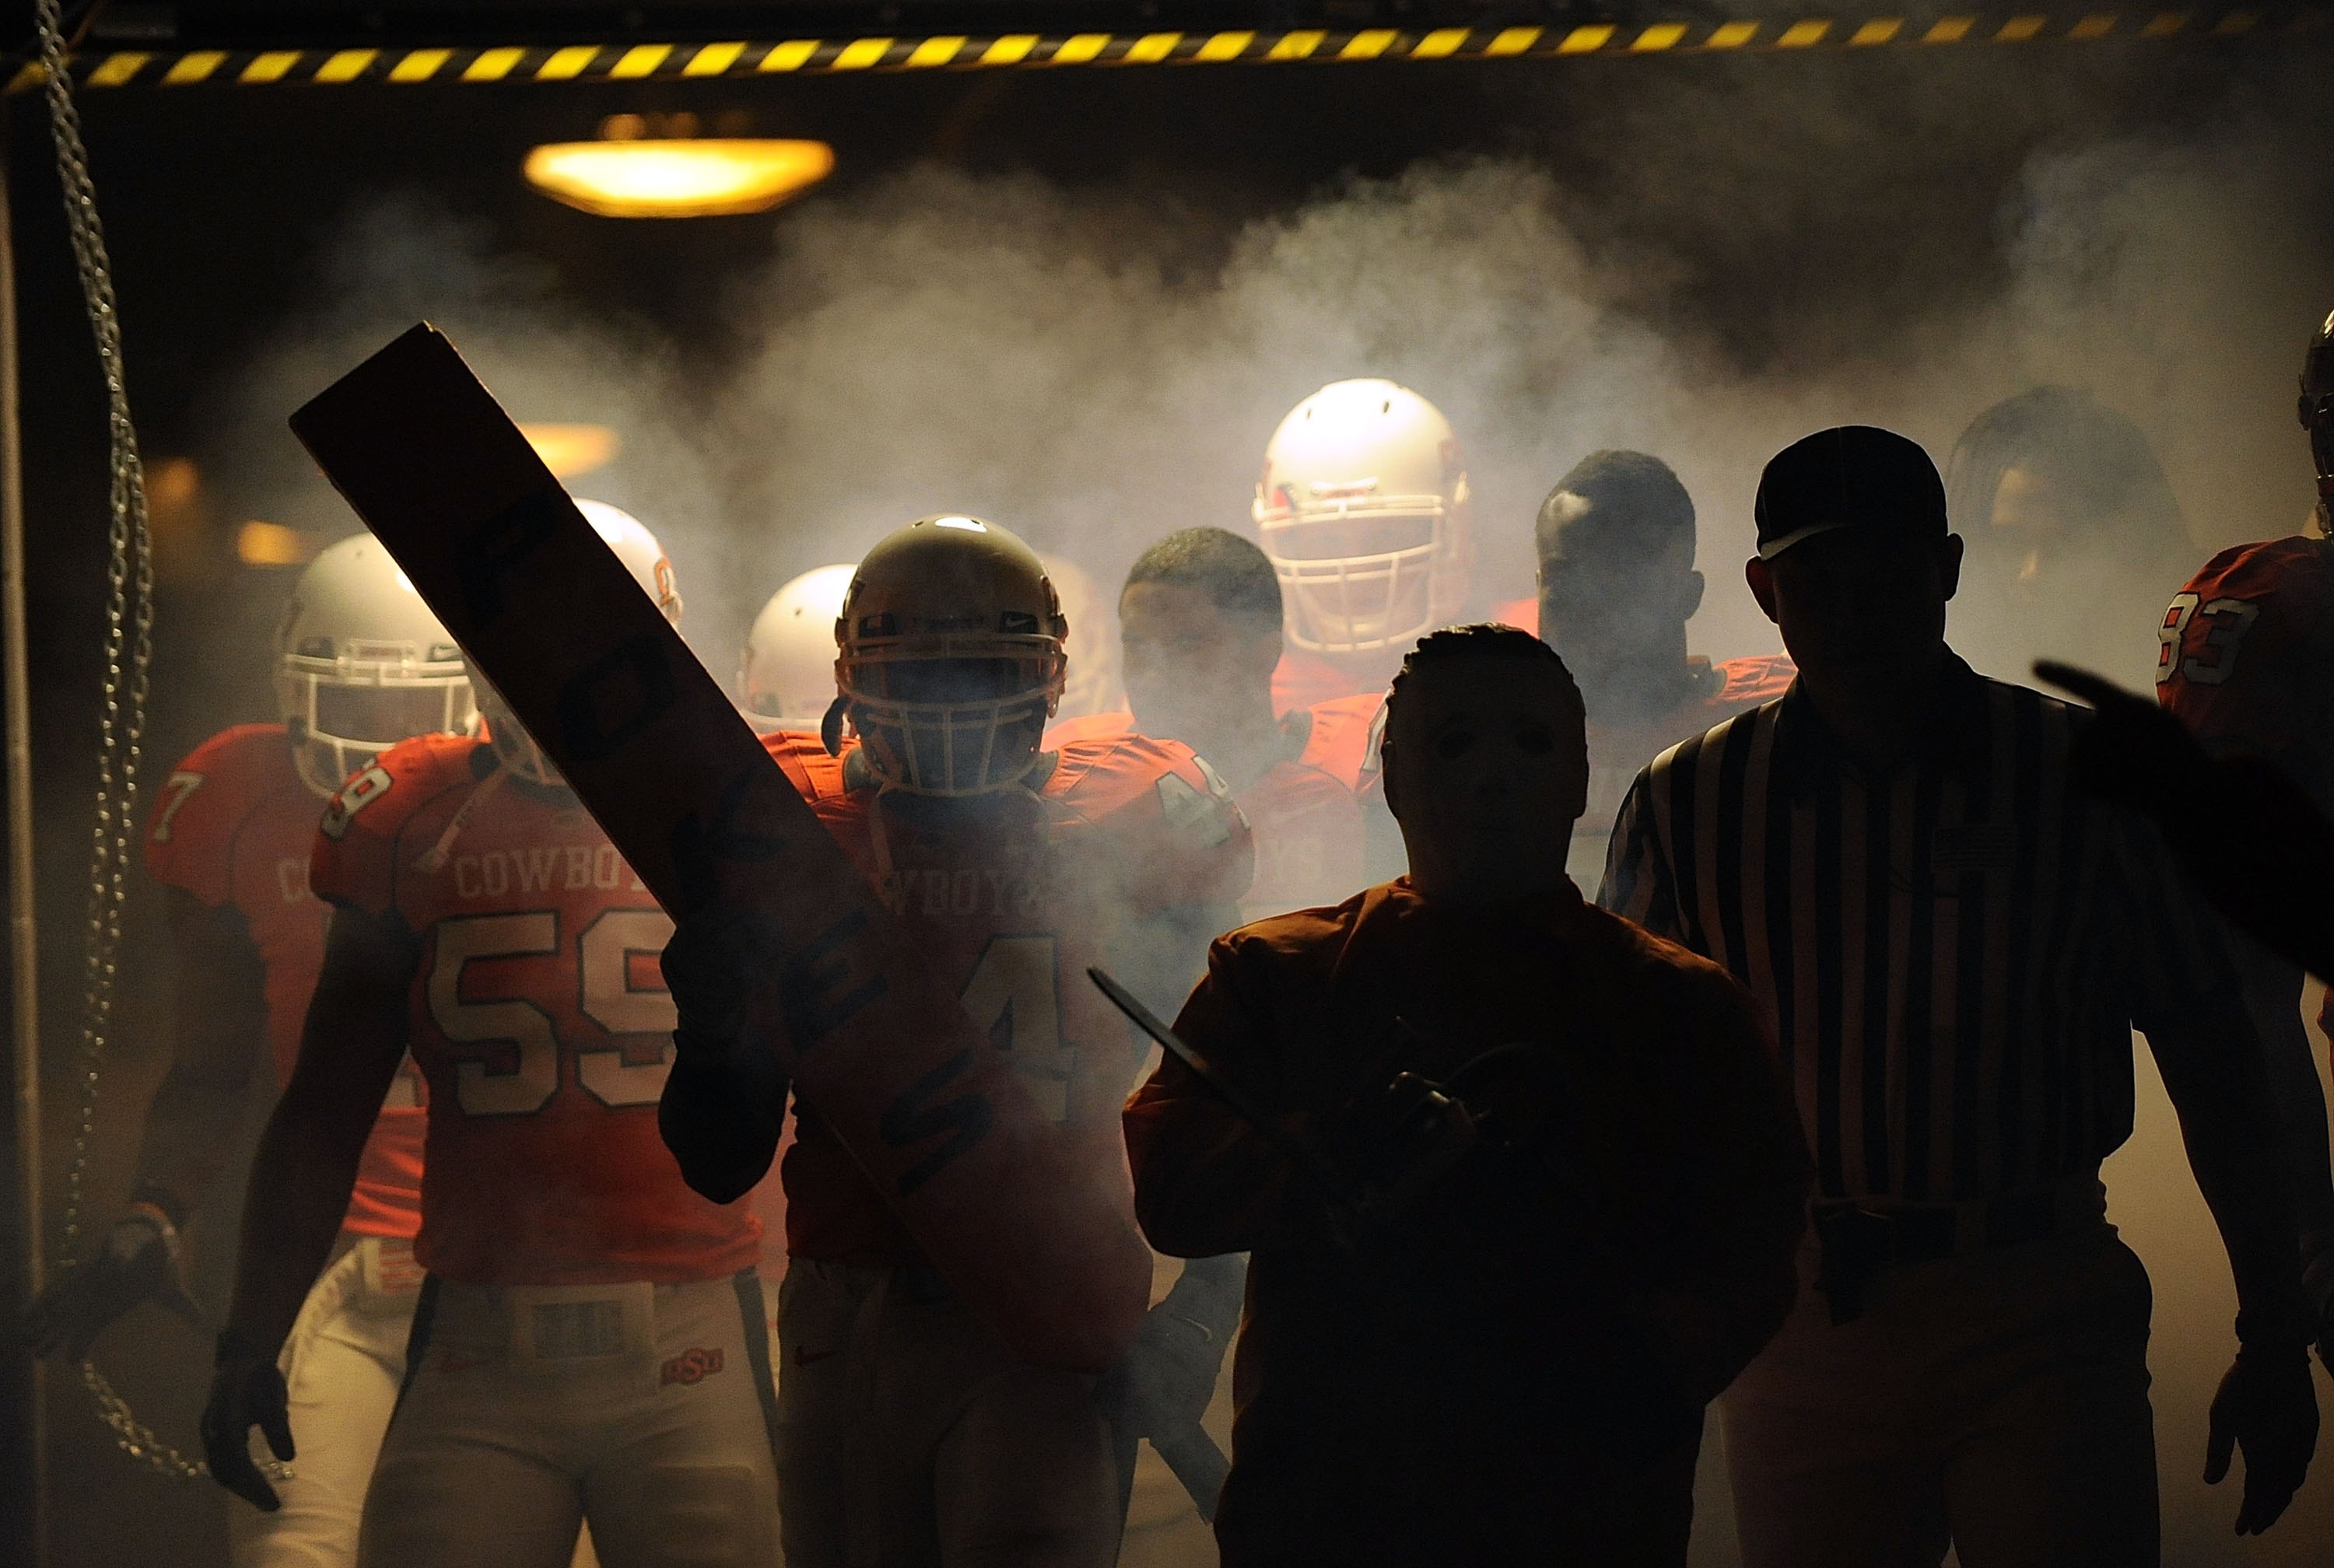 STILLWATER, OK - OCTOBER 31:  The Oklahoma State Cowboys make their way through the tunnel before taking on the Texas Longhorns at Boone Pickens Stadium on October 31, 2009 in Stillwater, Oklahoma.  (Photo by Ronald Martinez/Getty Images)